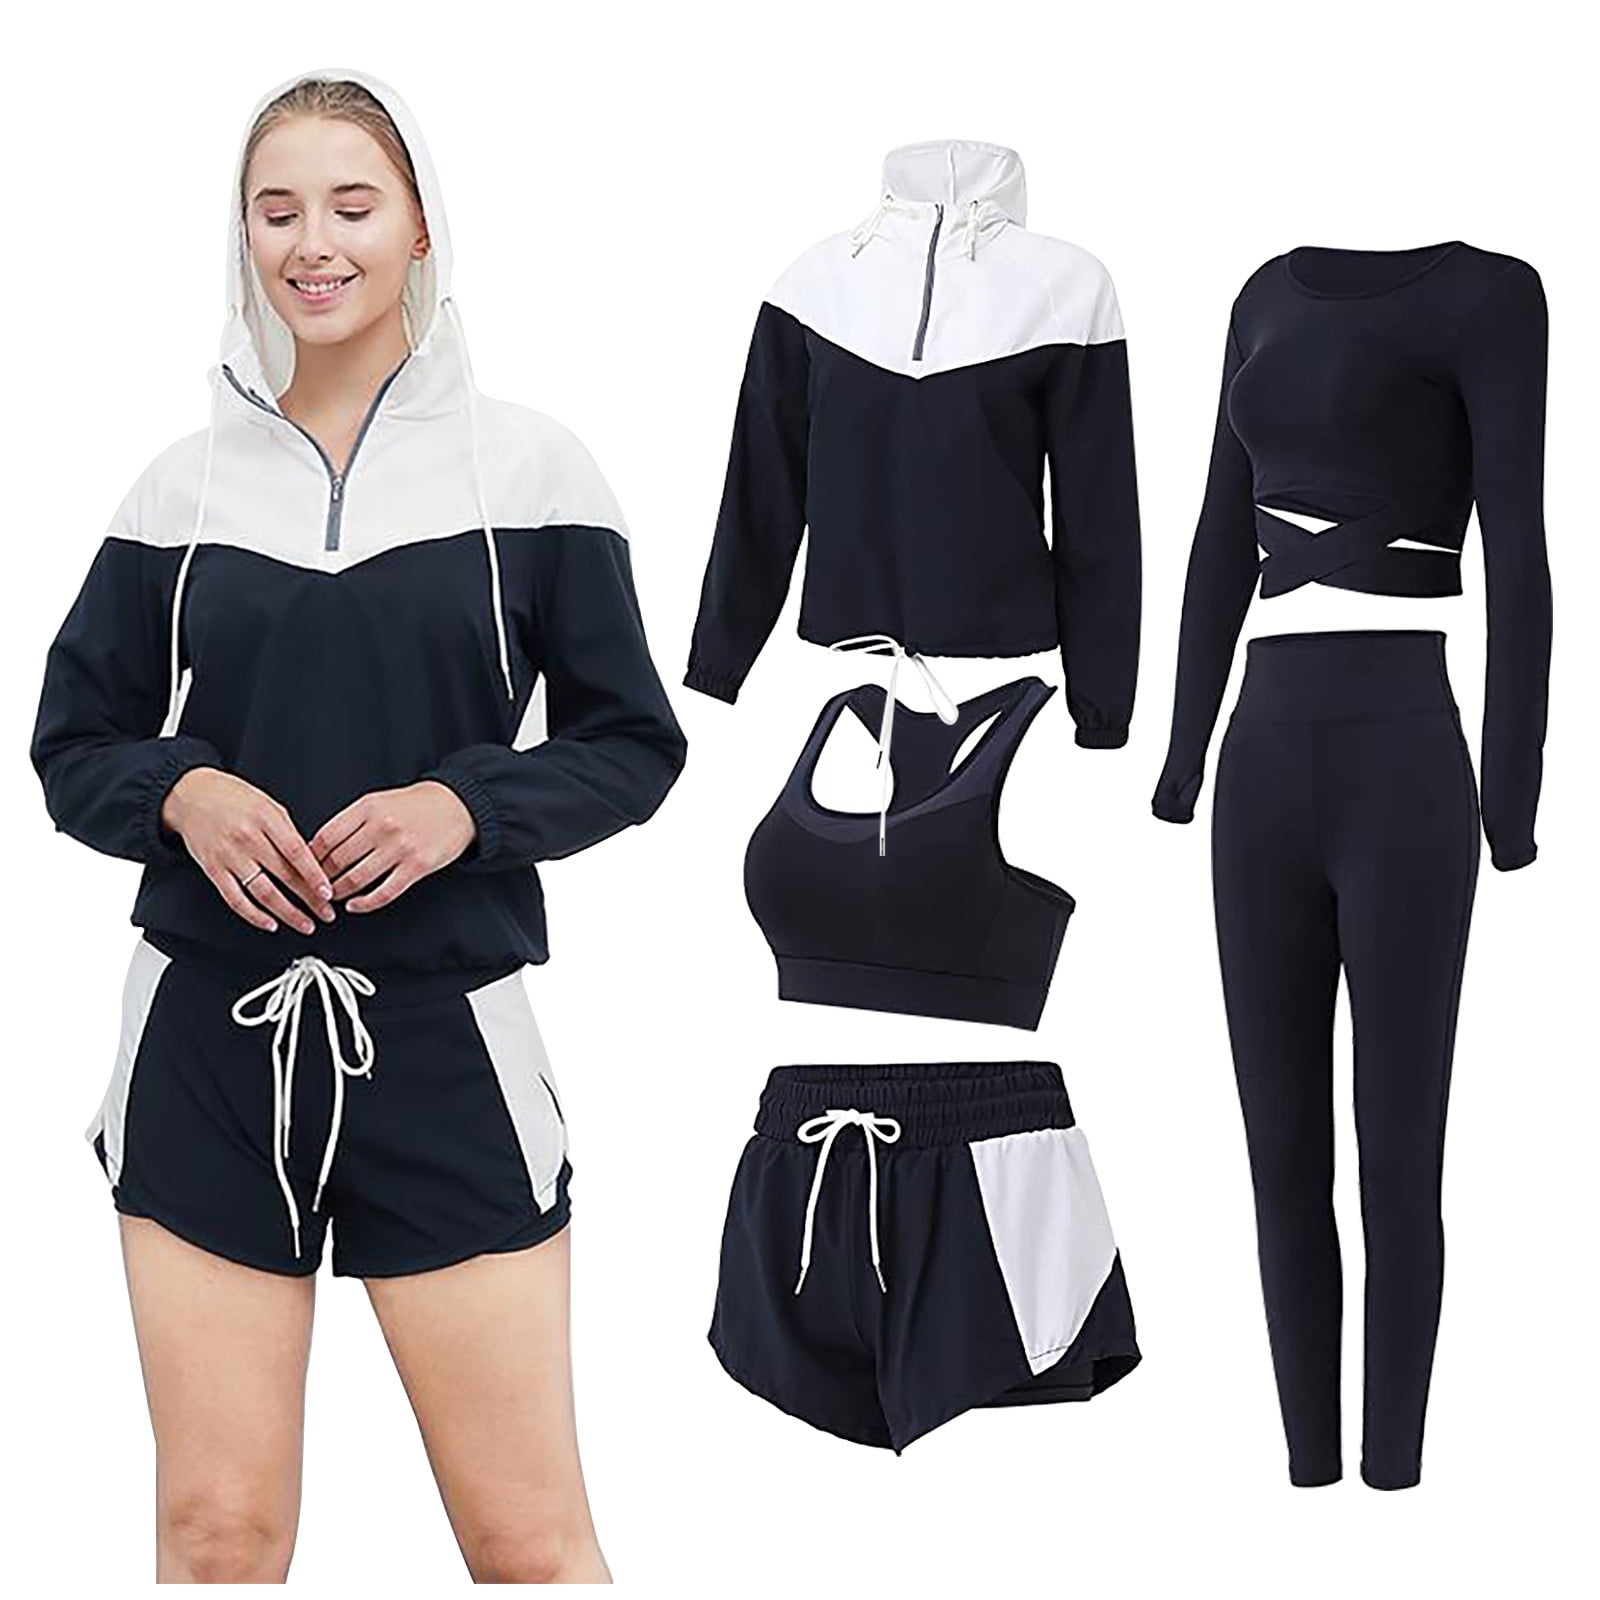 Buy HAPYSA Gym Suit Yoga Suit Track Suit for Women, Stretchable Breathable  Cloths For Exercise, Sports, Tracking, Joging, Yoga for Girl (Free size,  Multi Color) (Green) at